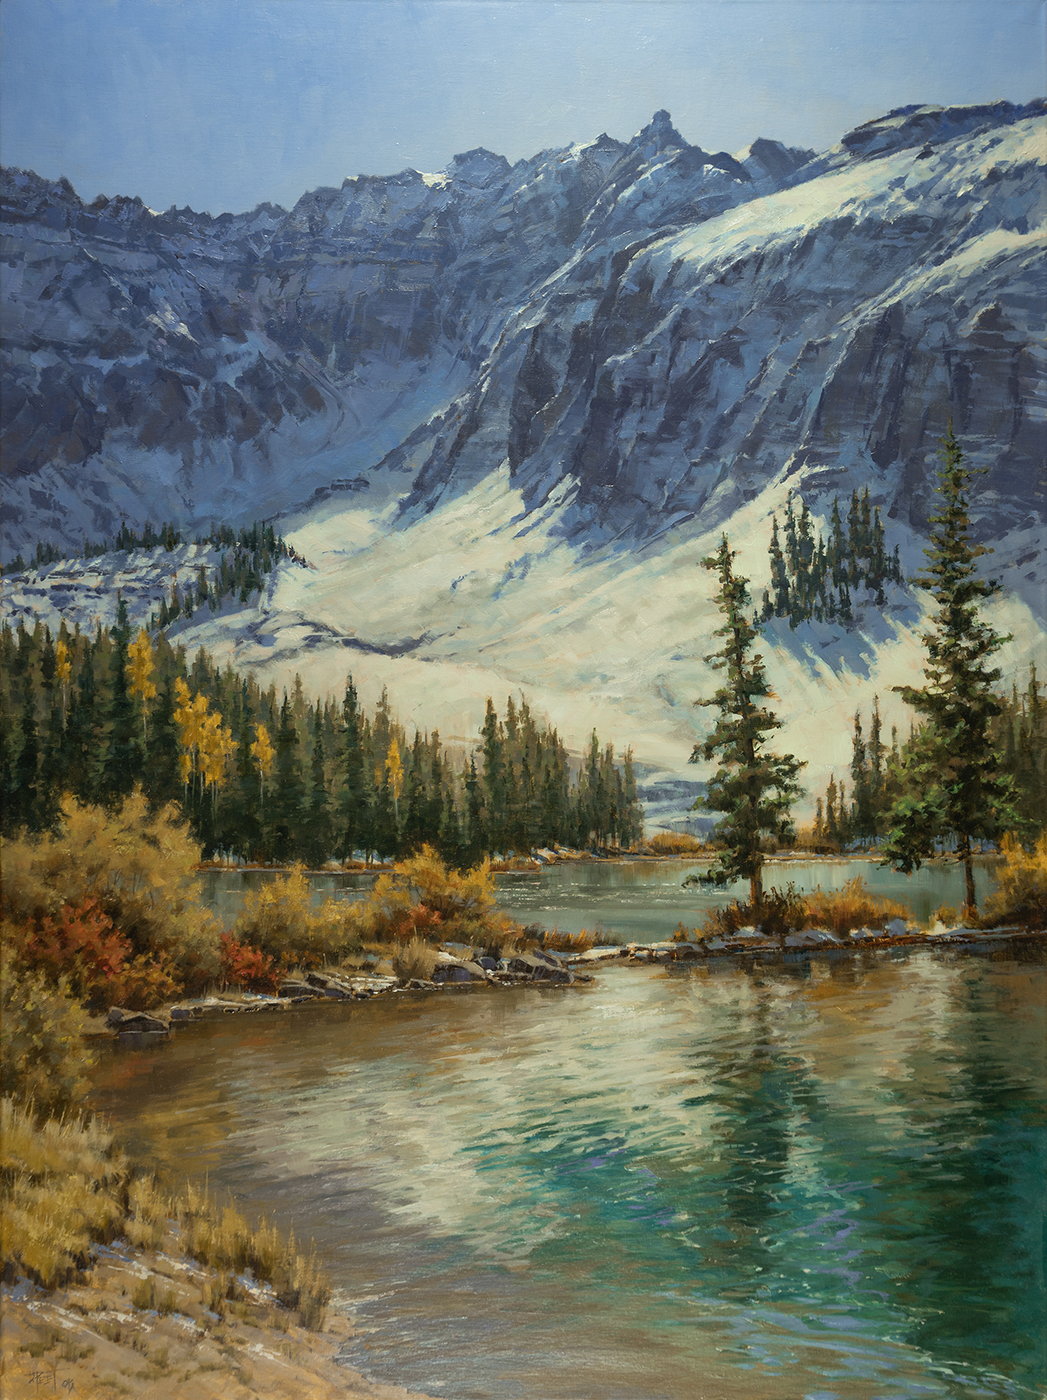 Darcie Peet September Breeze September Sparkle Alta Lake Telluride Colorado snow covered mountains icy lake snow mountain trees western oil landscape painting